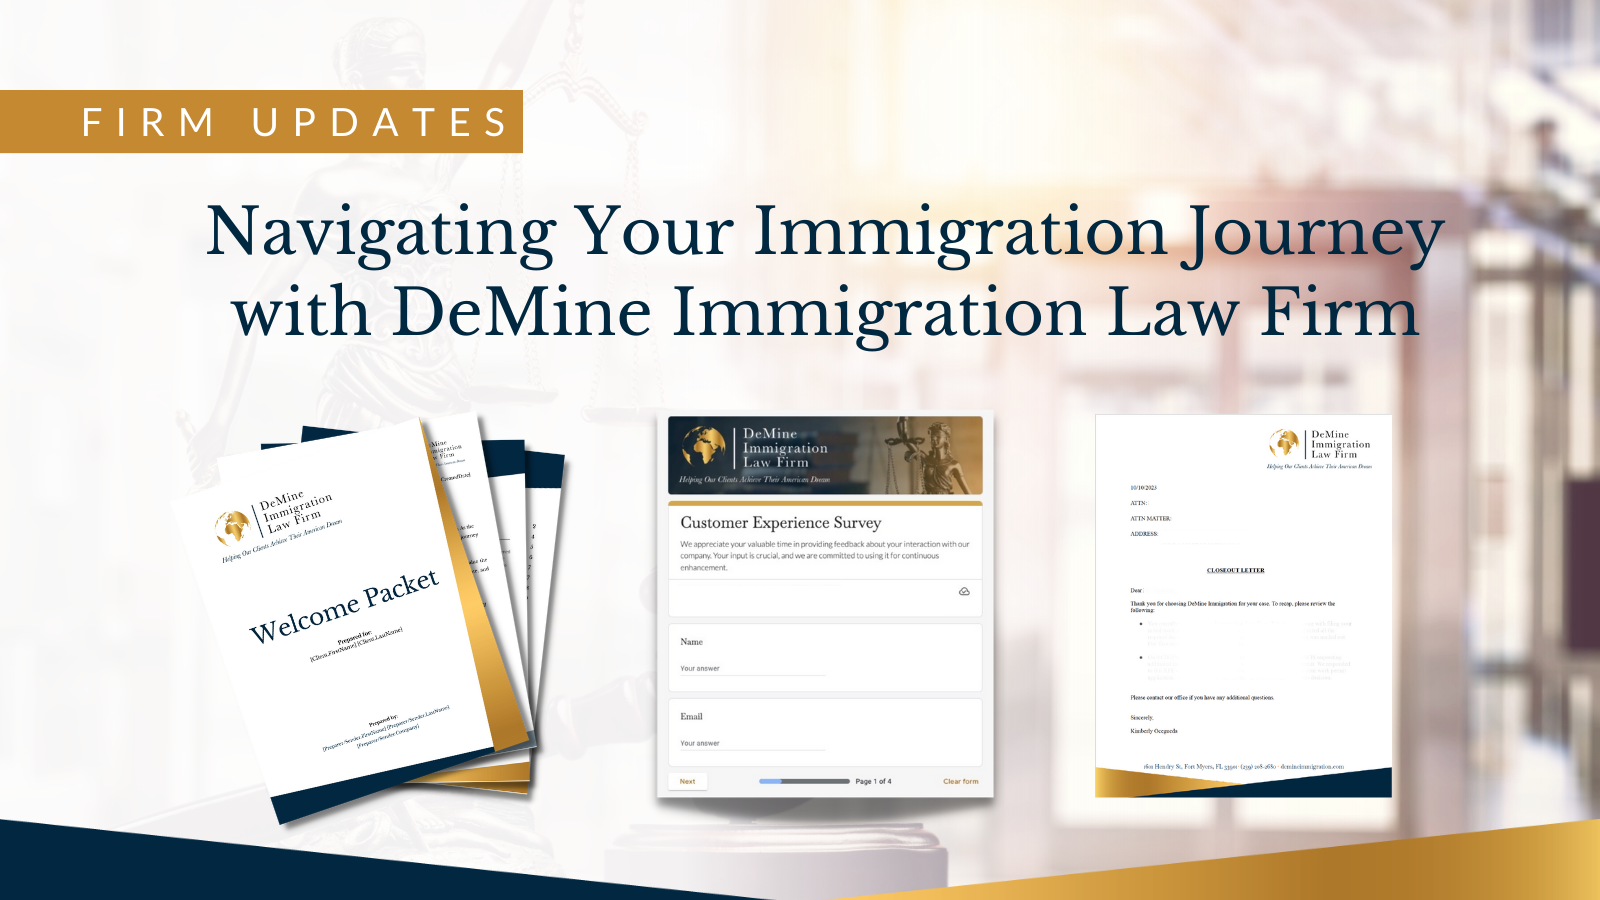 DeMine Immigration Law Firm's New Initiatives to Client Support